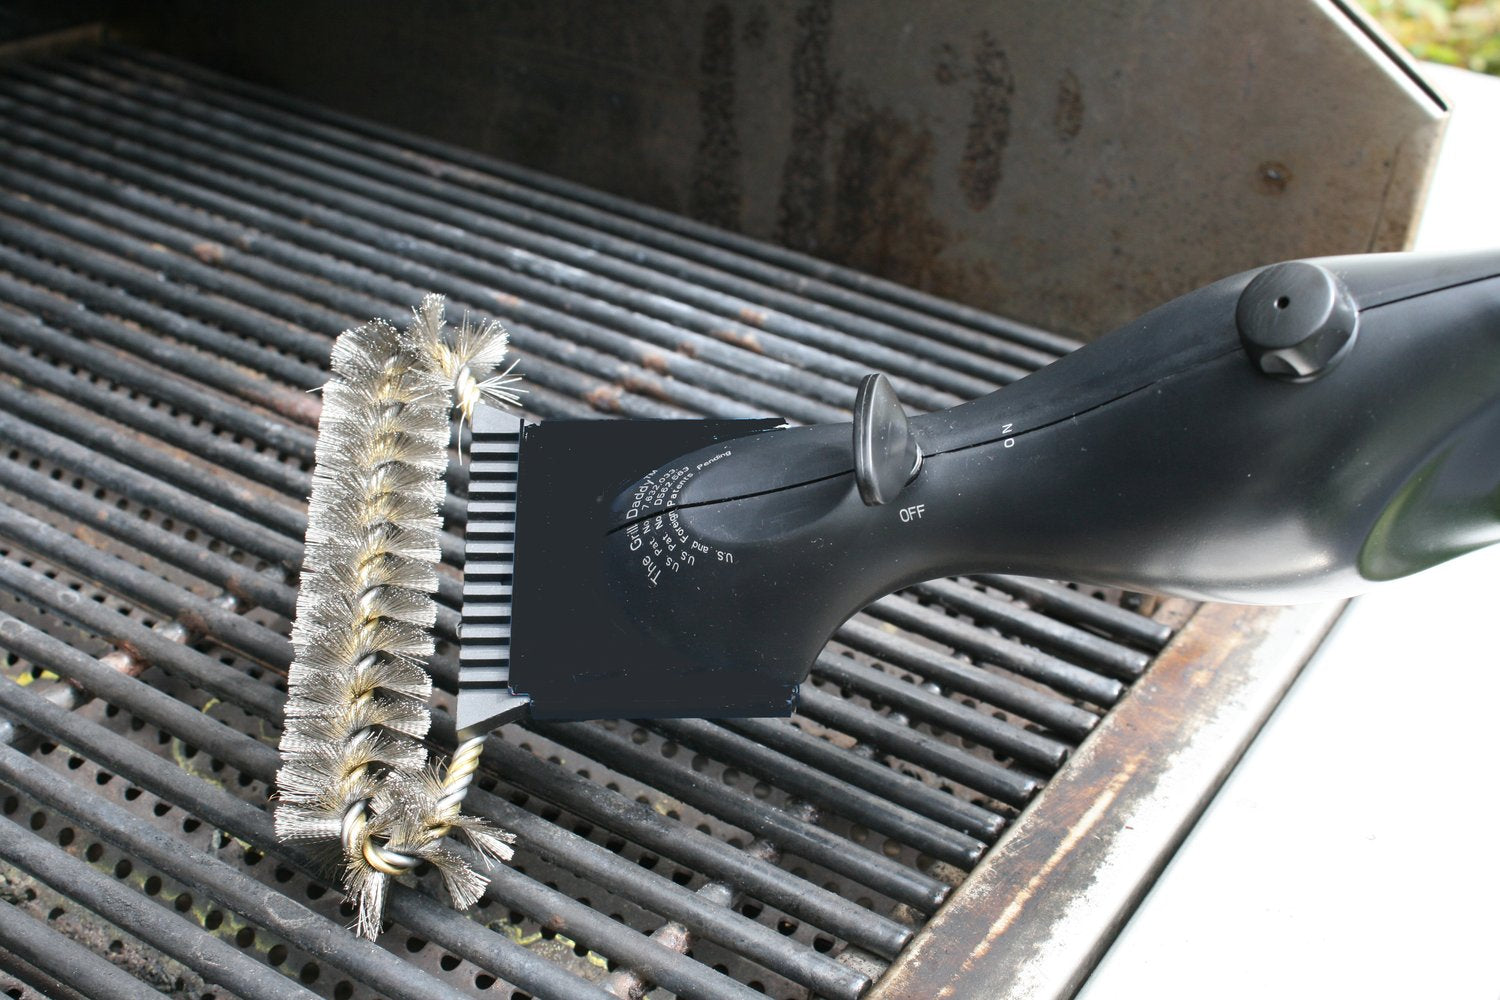 Grill Daddy cleans grills with the power of steam